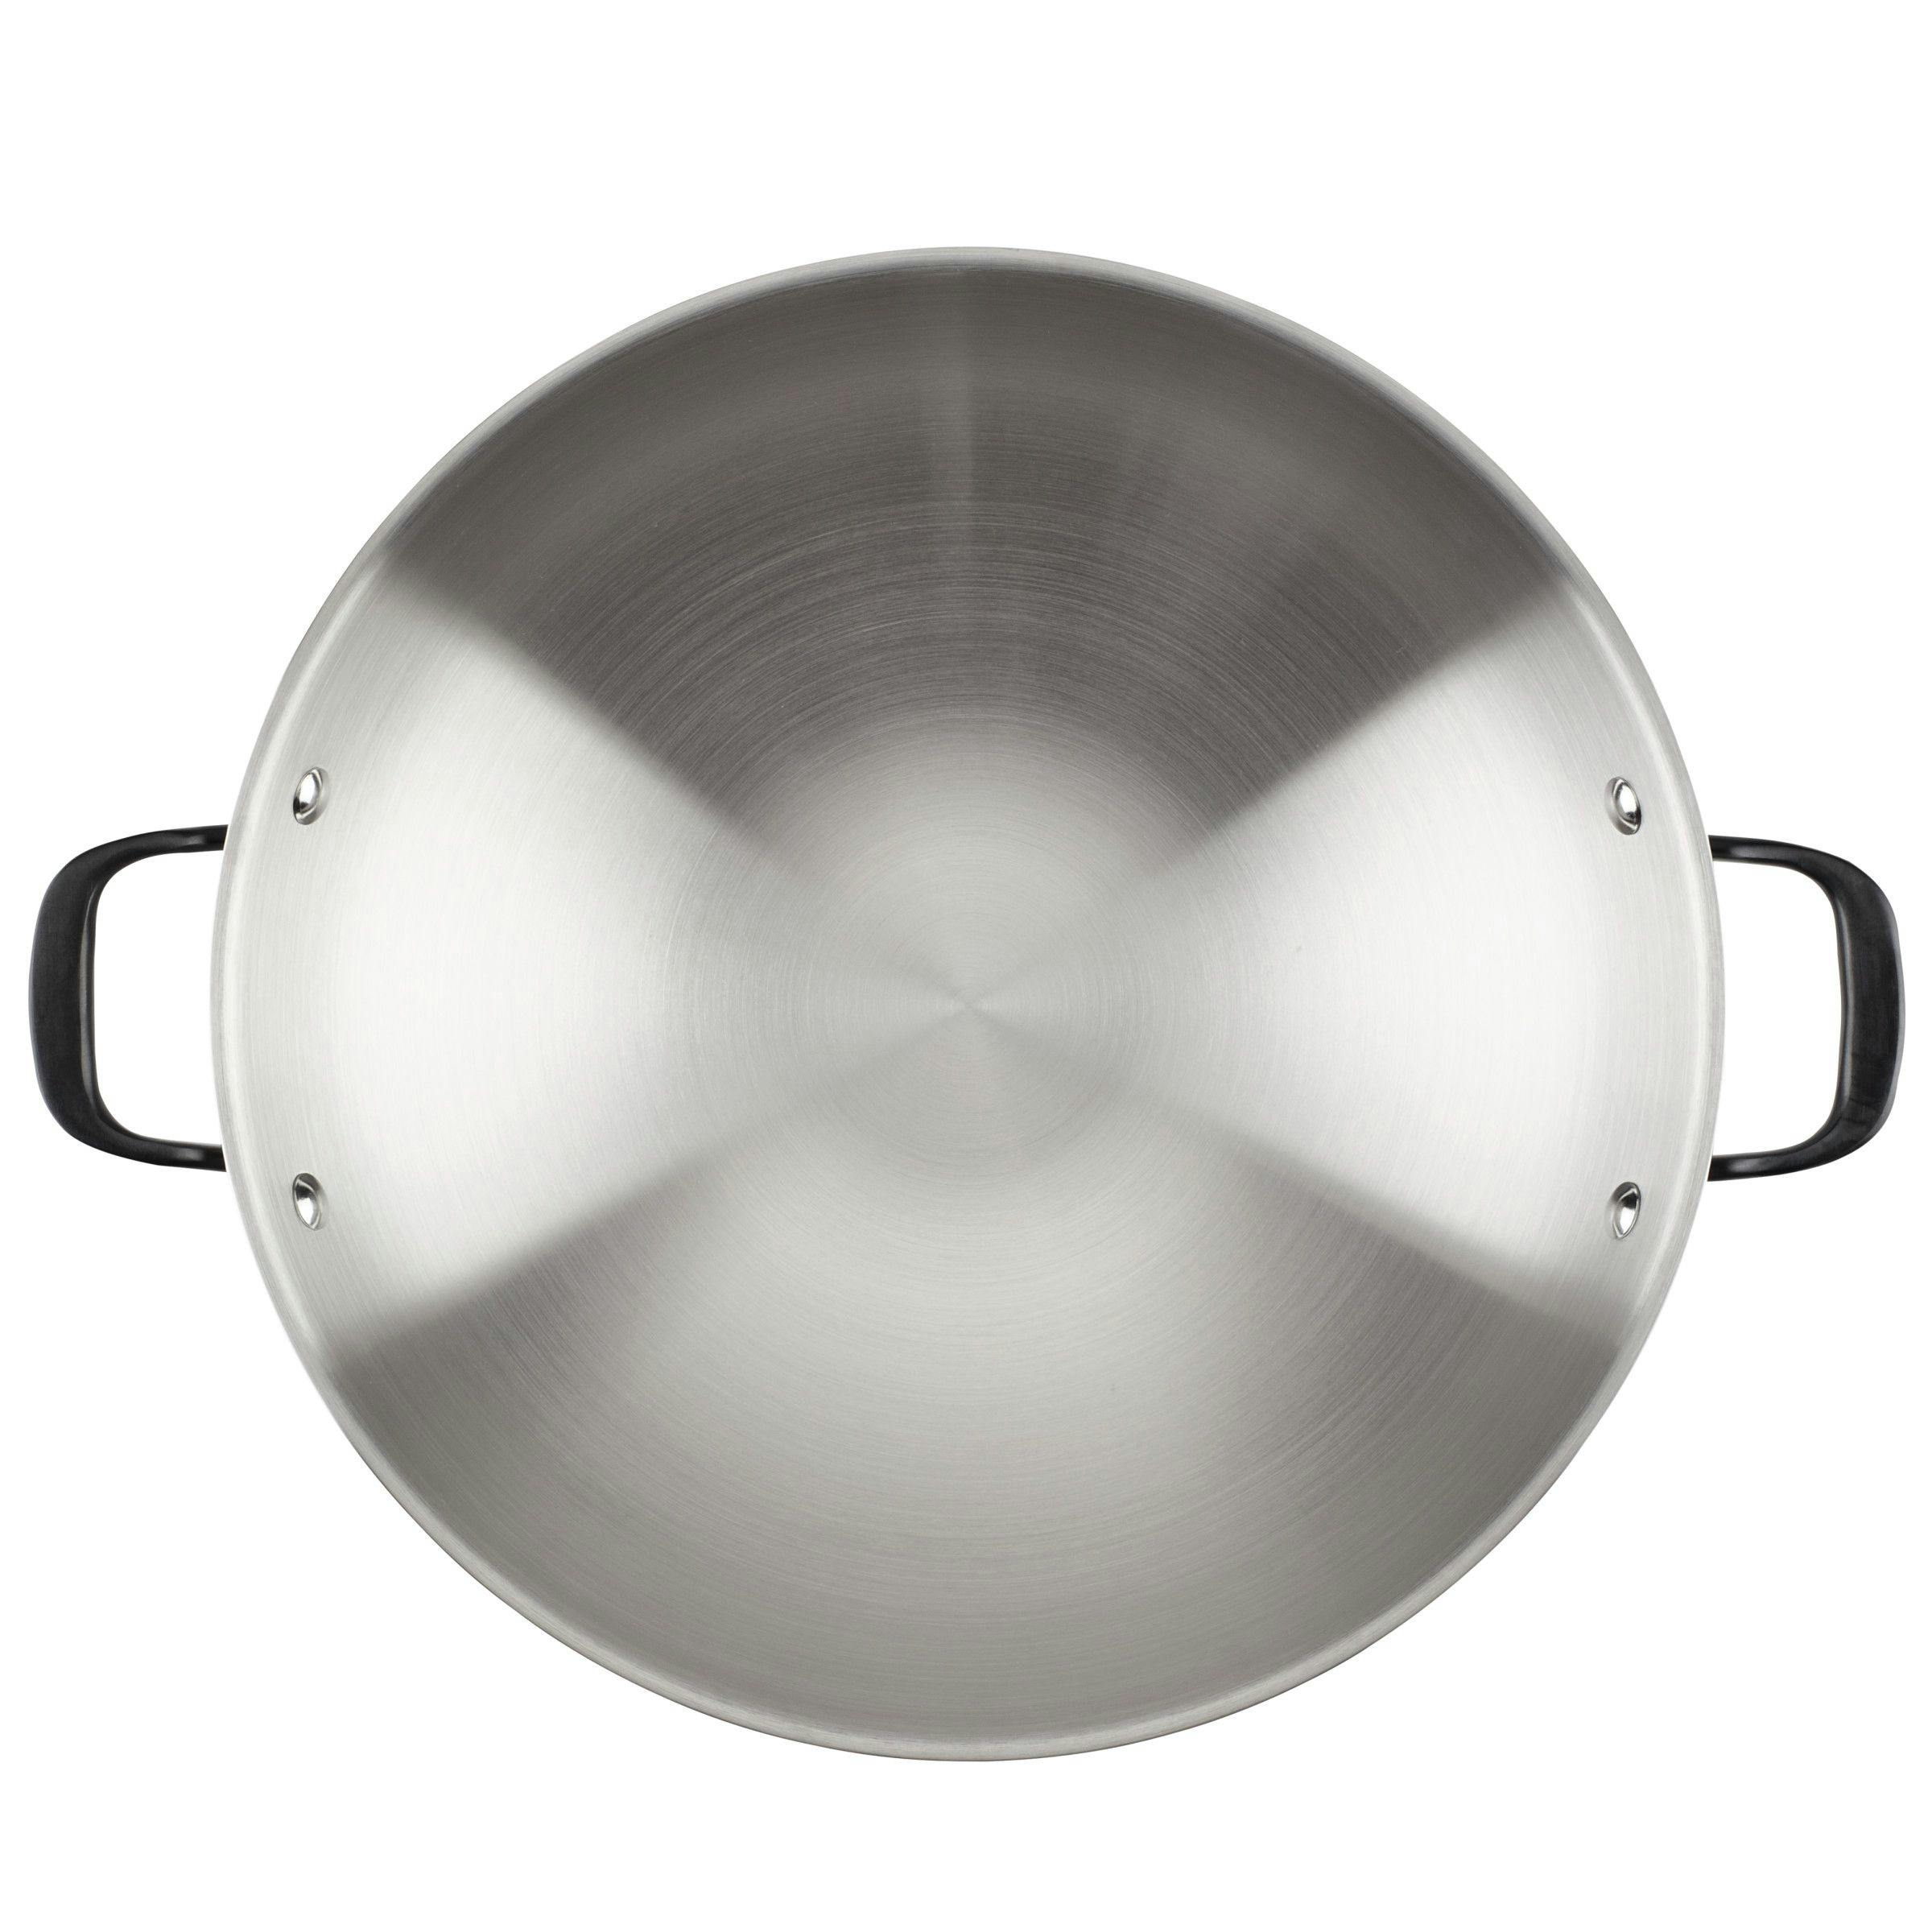 KitchenAid 5-Ply Clad Stainless Steel Induction Wok, 15-Inch, Polished Stainless Steel